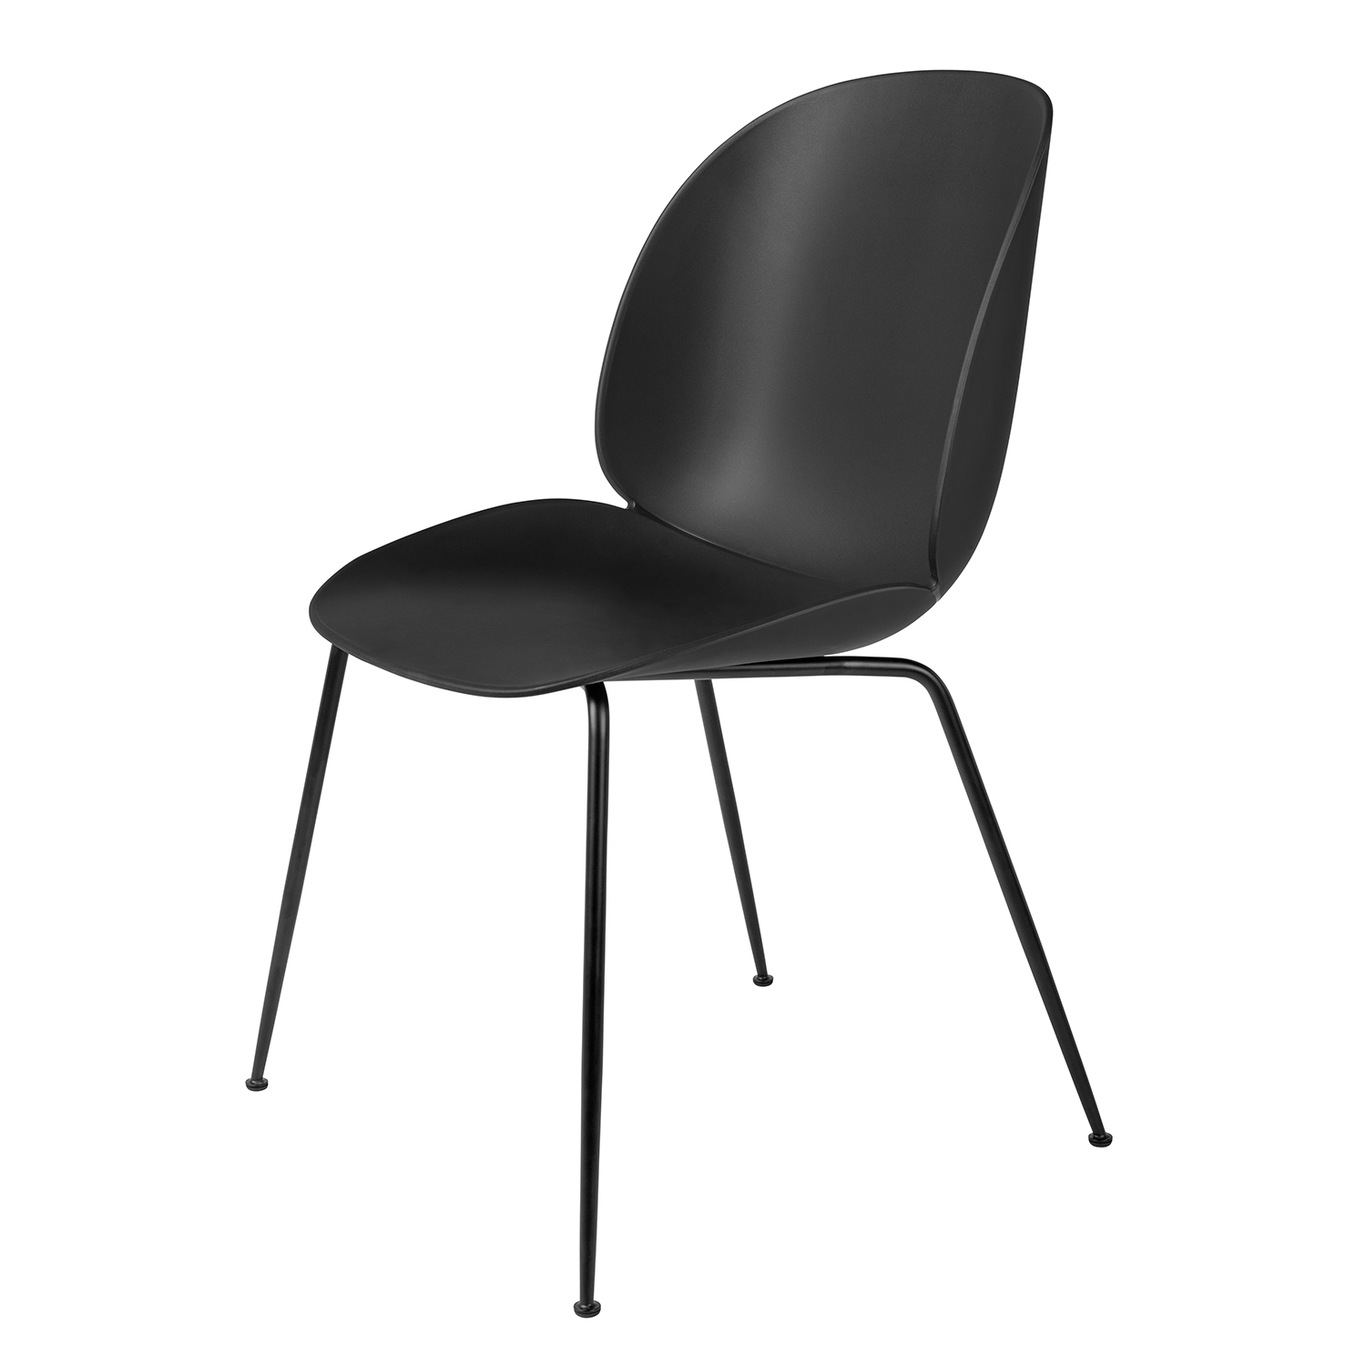 Beetle Dining Chair Un-upholstered, Conic Base Black, Black